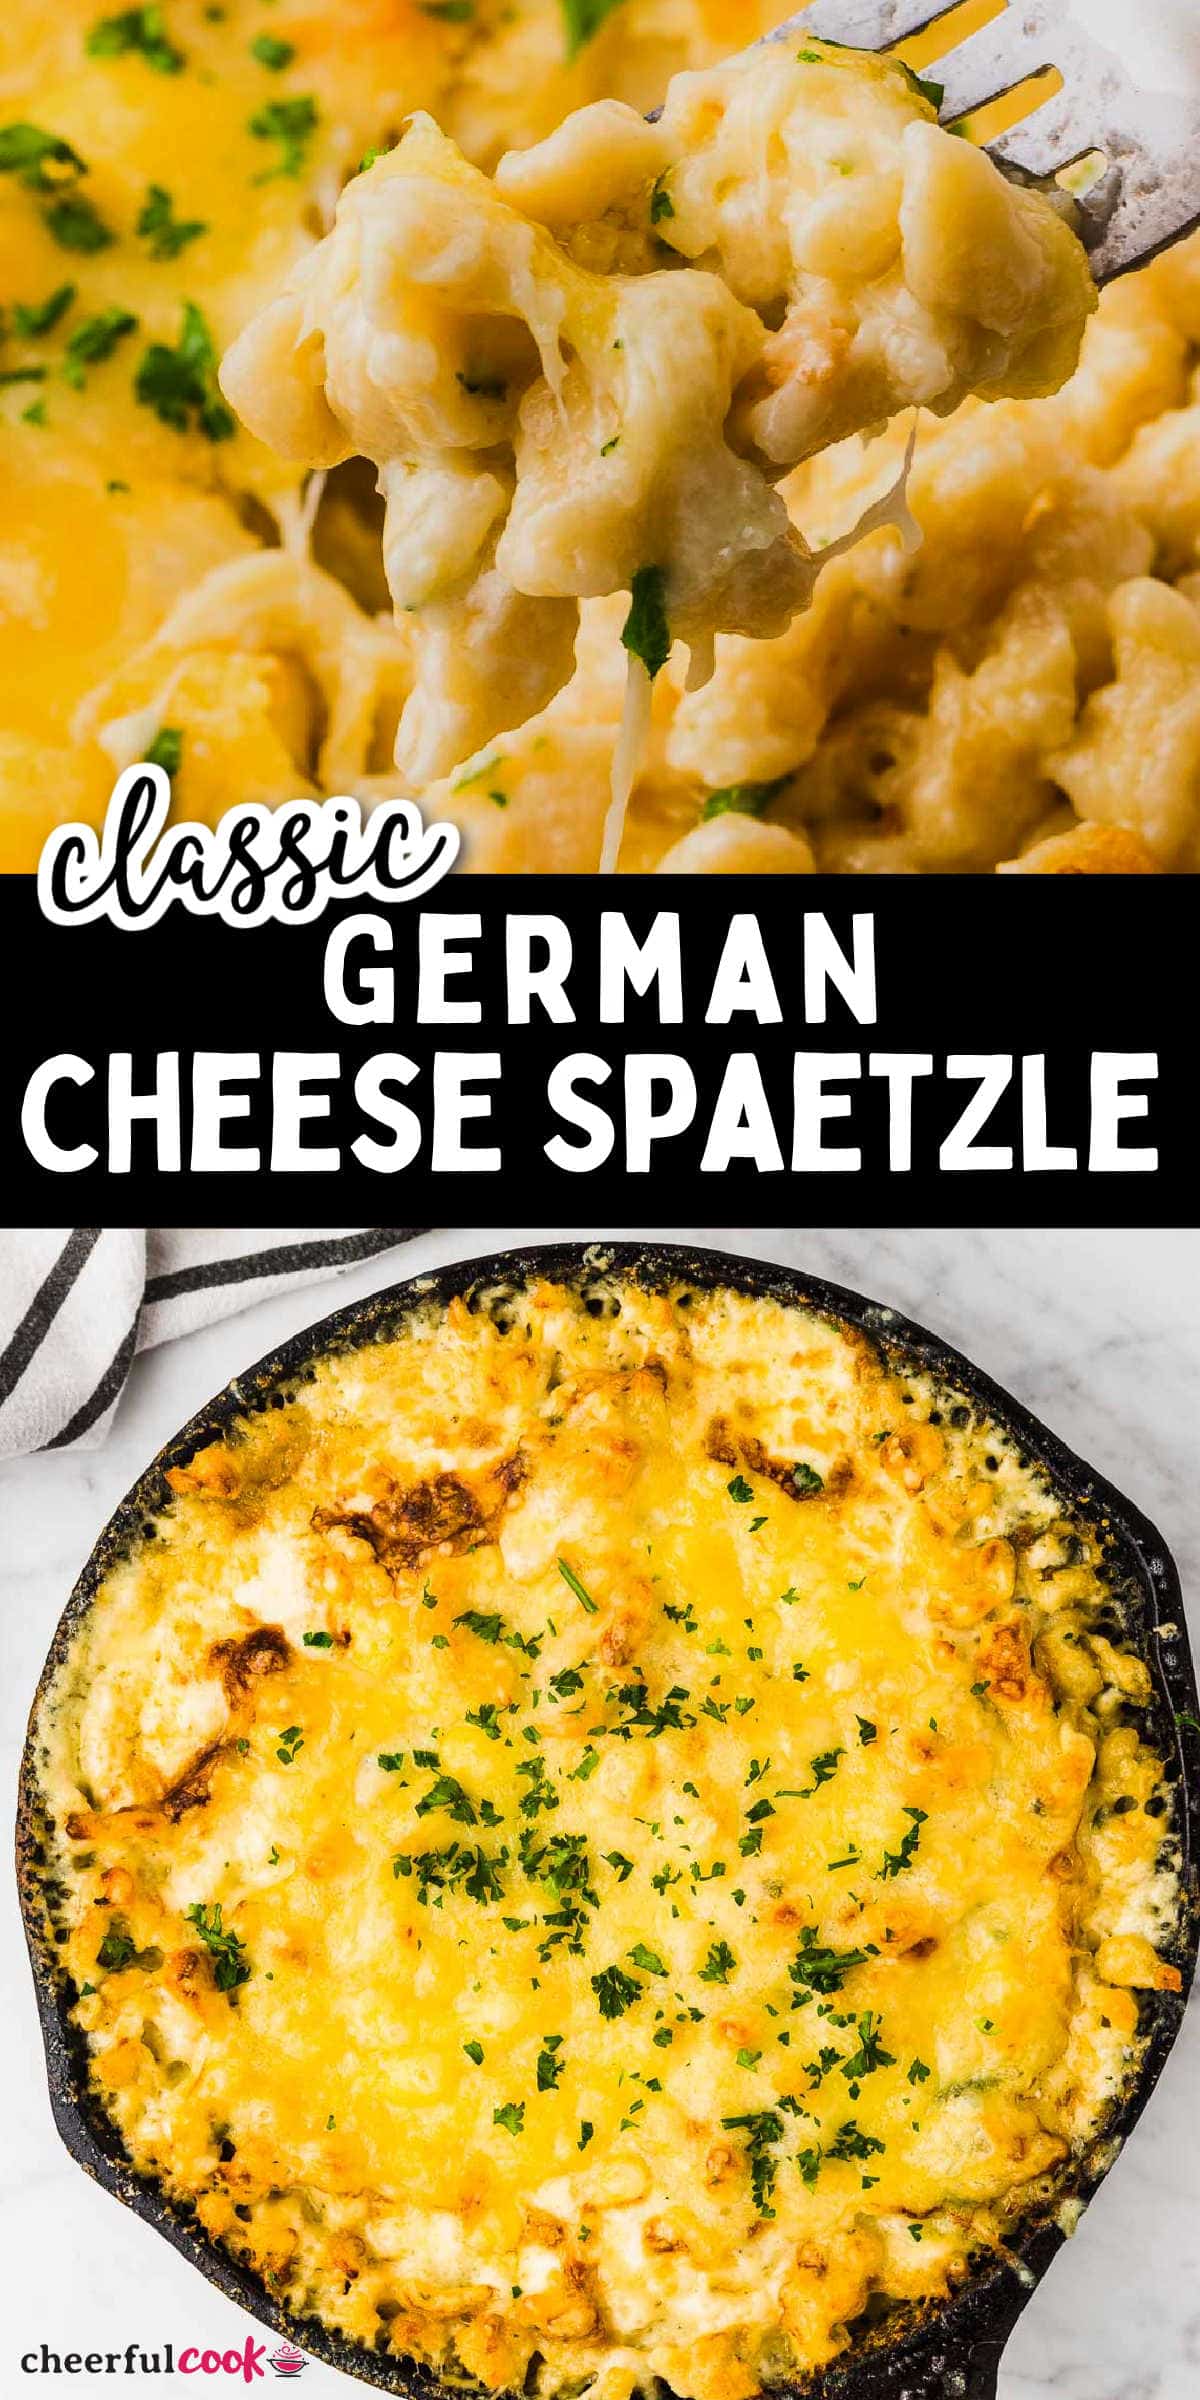 Cheese Spaetzle (Käsespätzle) are Germany's answer to American mac and cheese! This mouthwatering classic German recipe is made with homemade egg noodles that are cooked to perfection in a creamy cheese sauce. This recipe is delicious all year long and a must-have for Oktoberfest. #cheerfulcook #cheesespaetzle #kasespatzle #German #Oktoberfest #recipe #spaezle via @cheerfulcook